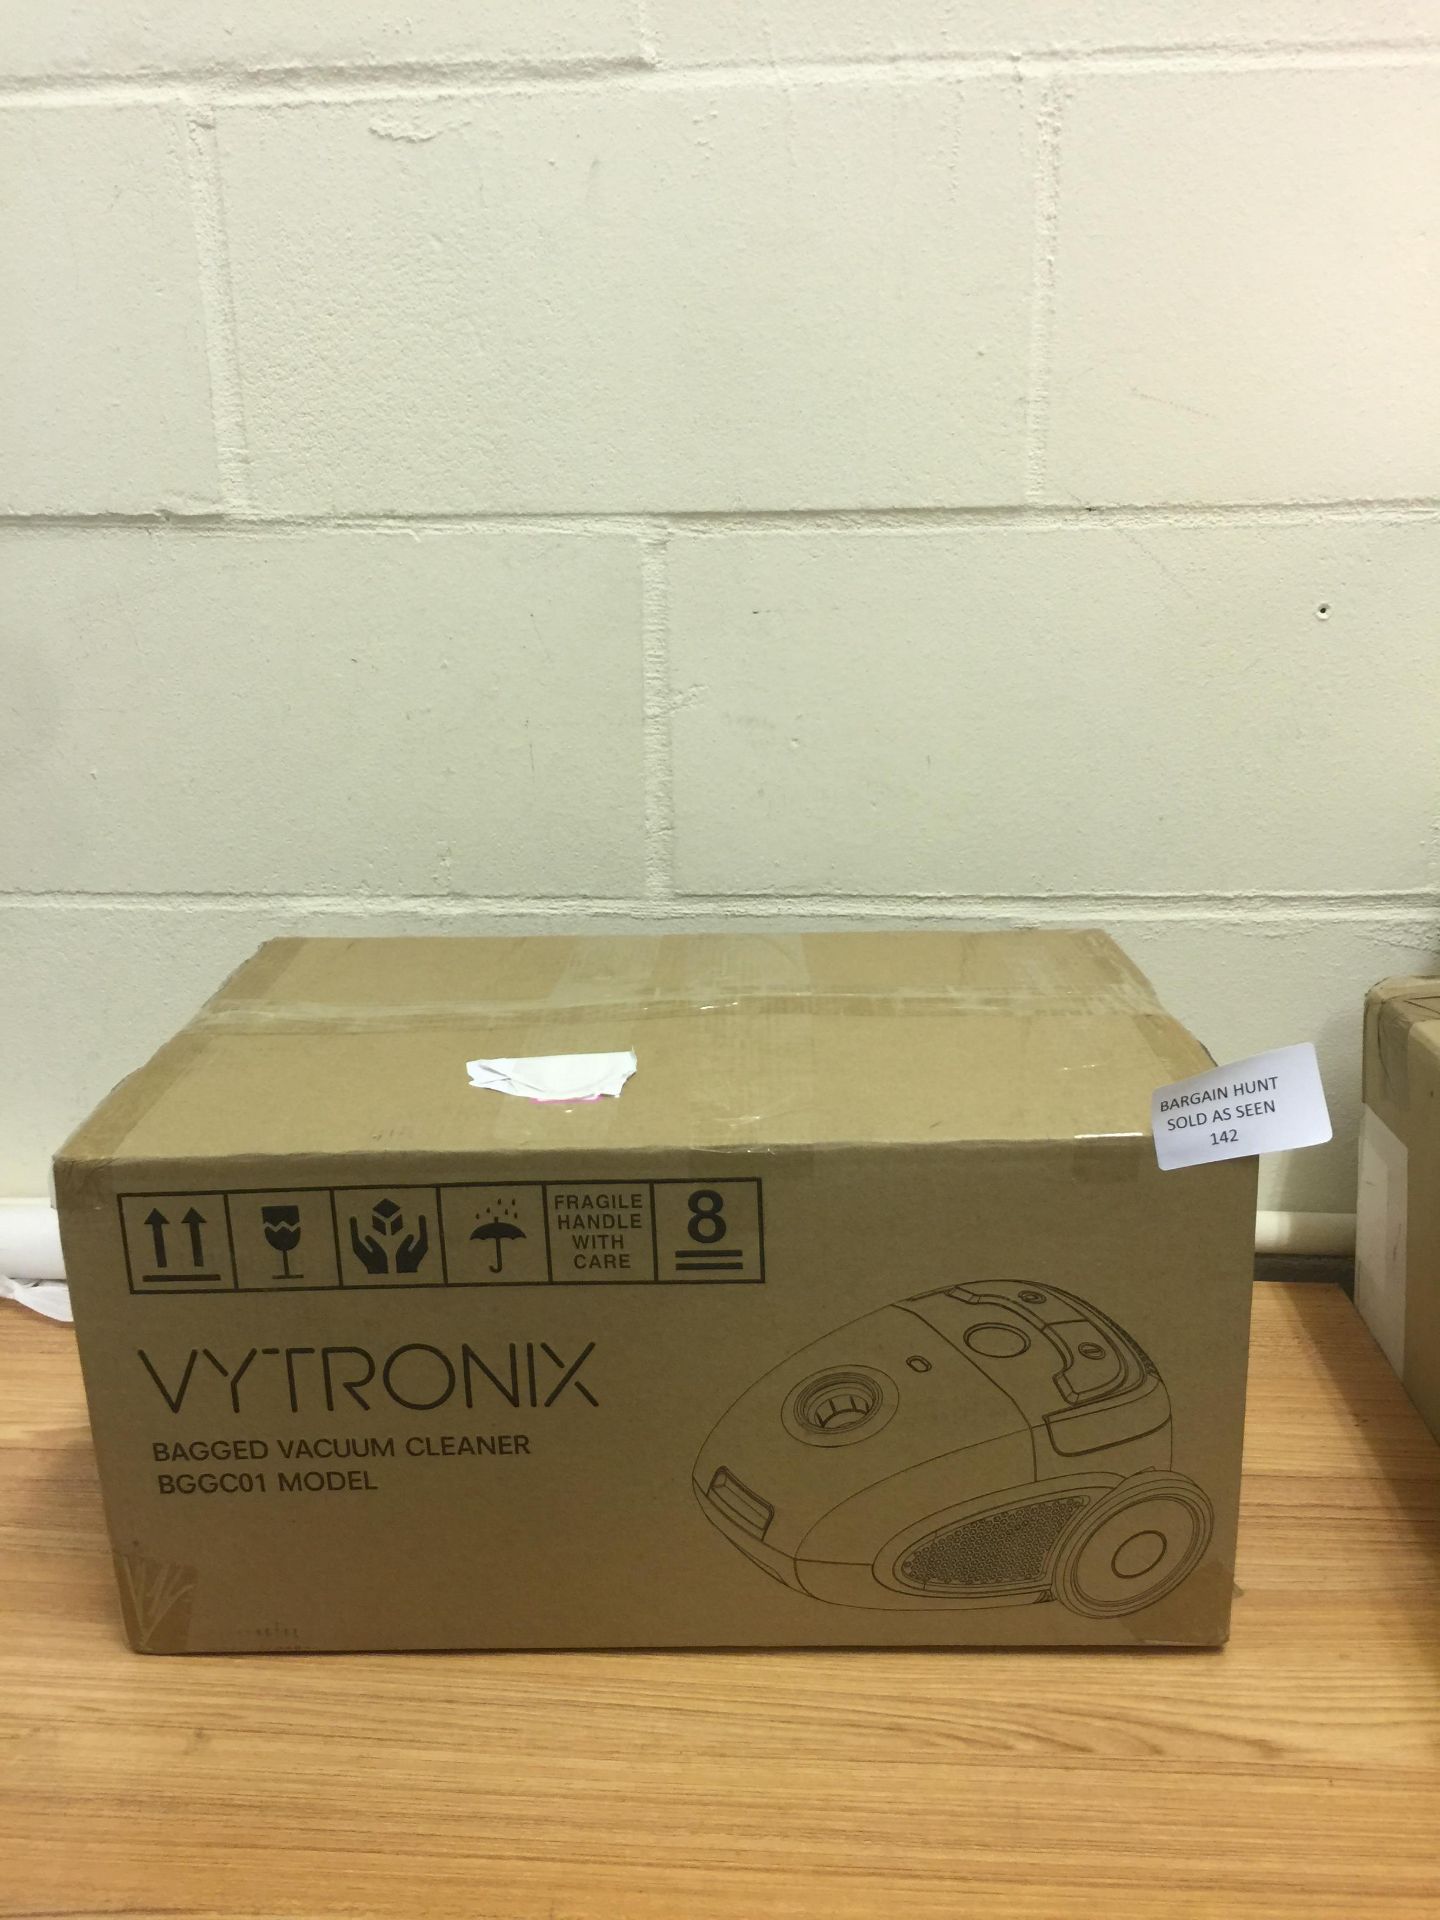 Vytronix Bagged Vacuum Cleaner